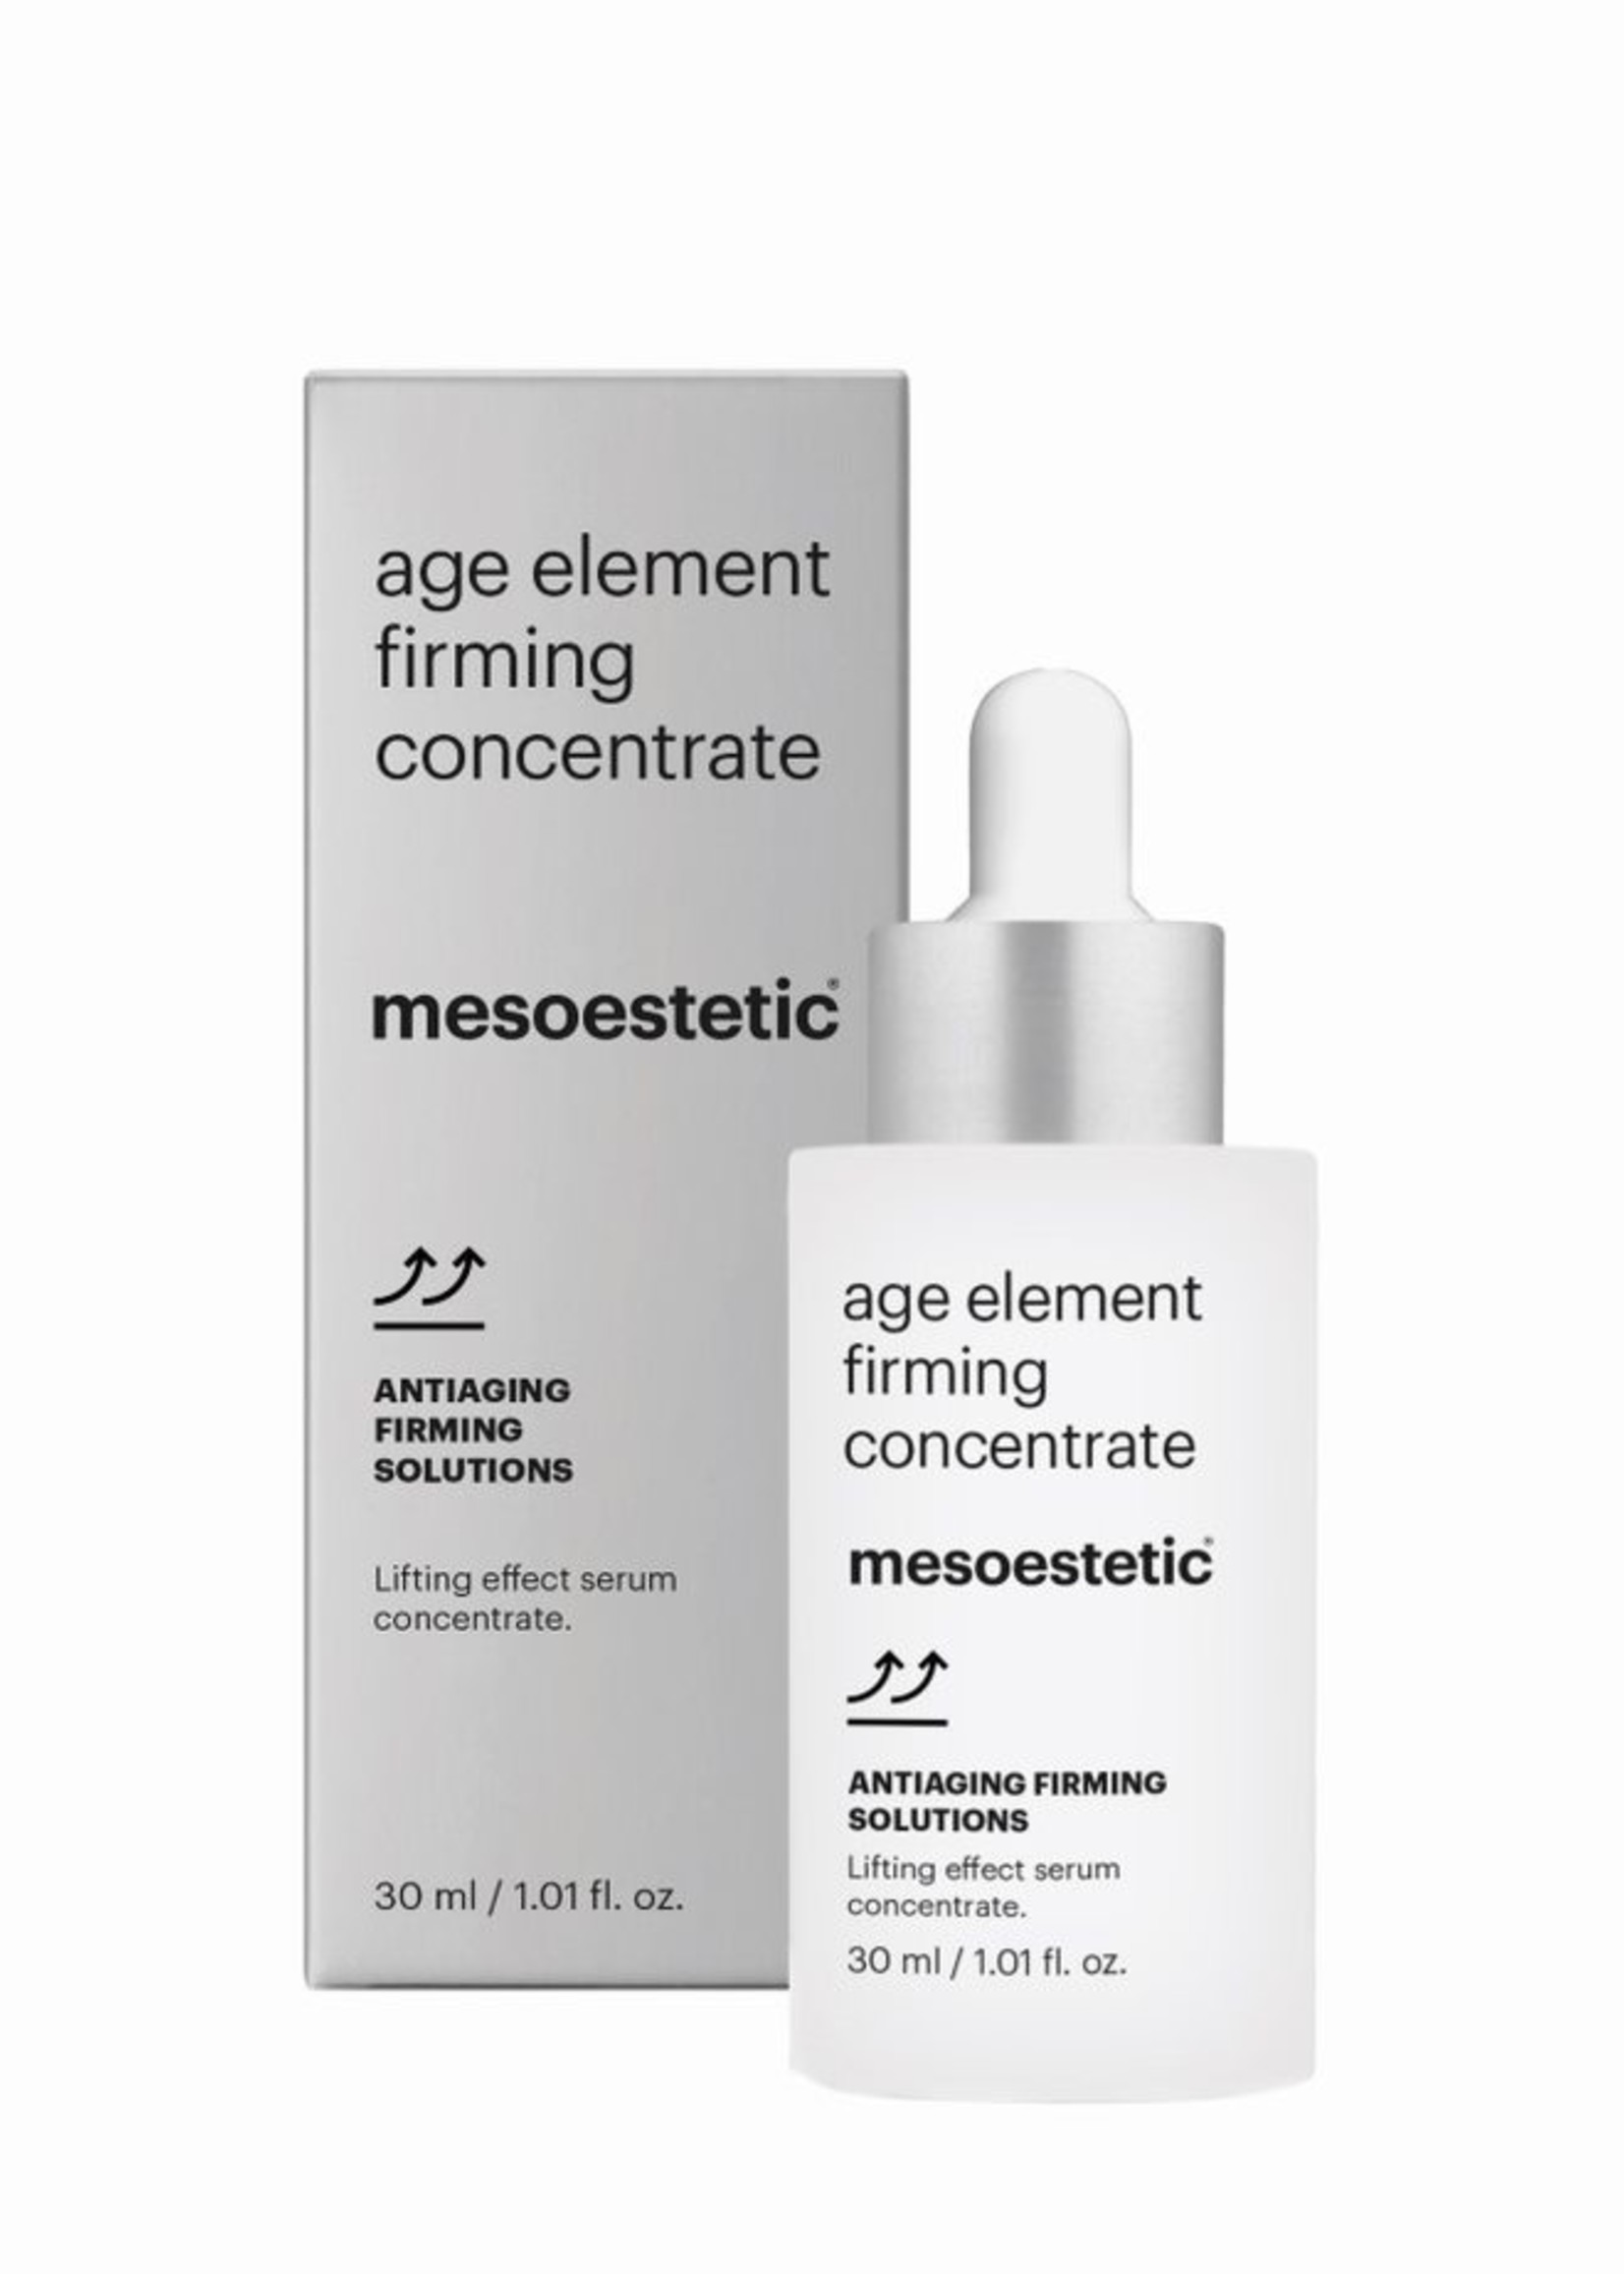 Mesoestetic Age element firming concenrate serum